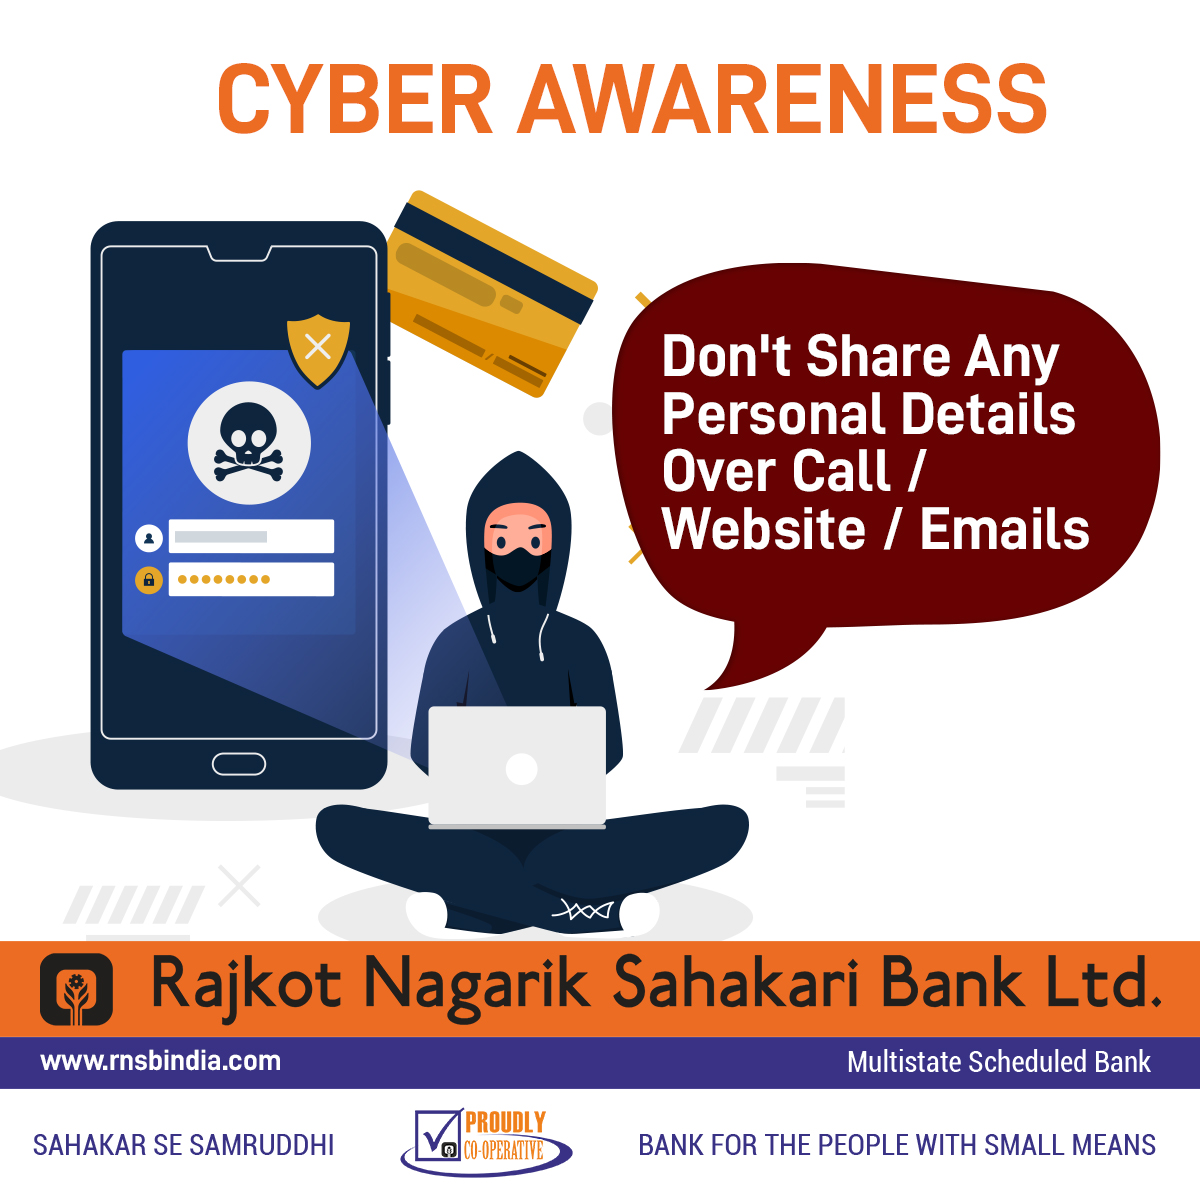 🔒 May is Cyber Security Awareness Month! Protect yourself and your digital life by staying informed and vigilant. 
.
 . 
#RNSB #rajkotnagariksahakaribank #StayAlert 🛑 #PasswordSecurity 💪 #UpdateRegularly #DoubleProtection #KnowledgeIsPower #CyberSecurityAwarenessMonth